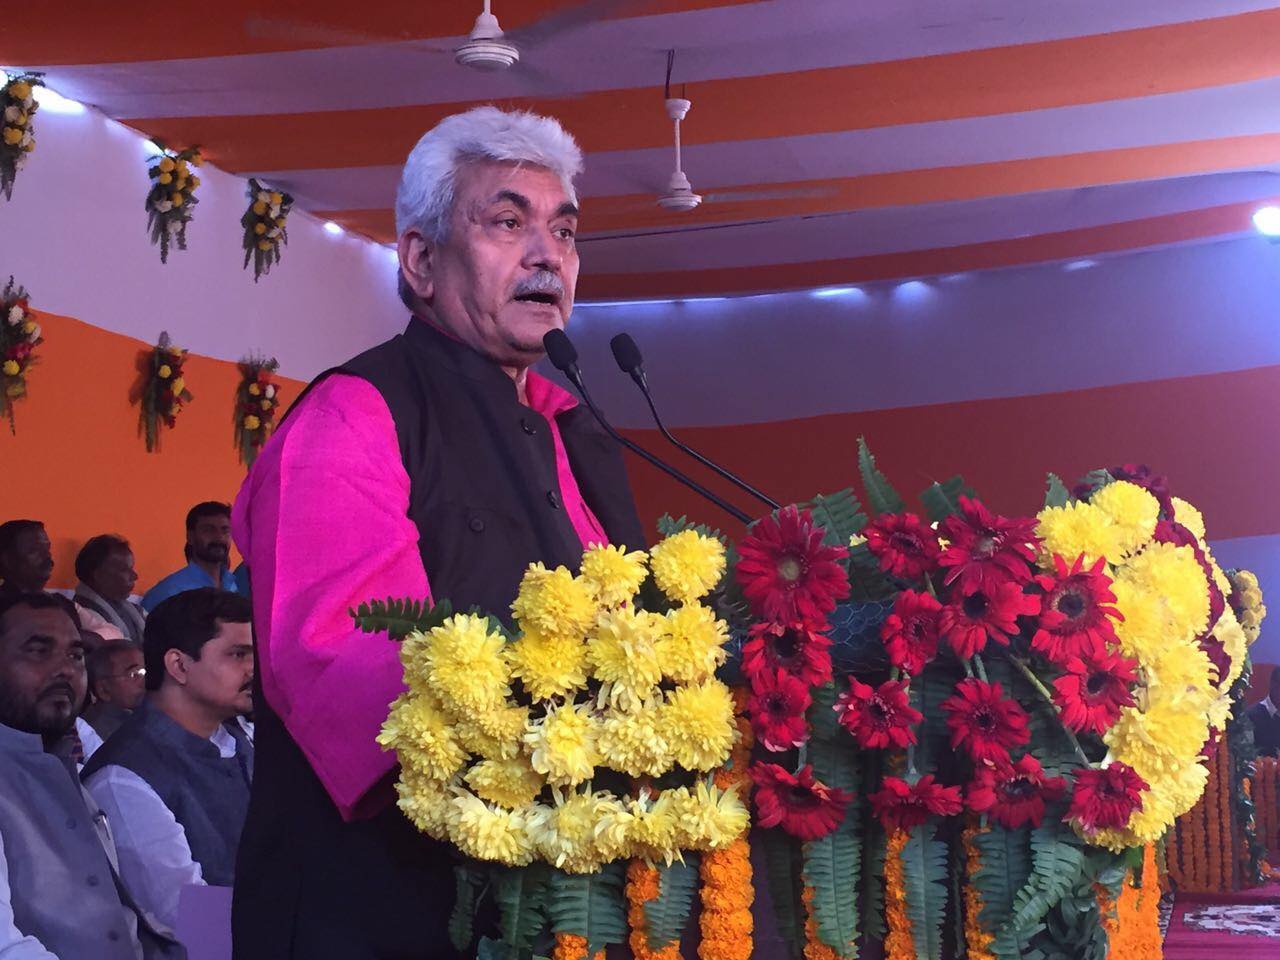 Agriculturist at heart, politician by choice: Meet Manoj Sinha, the new J&K Lt. Governor